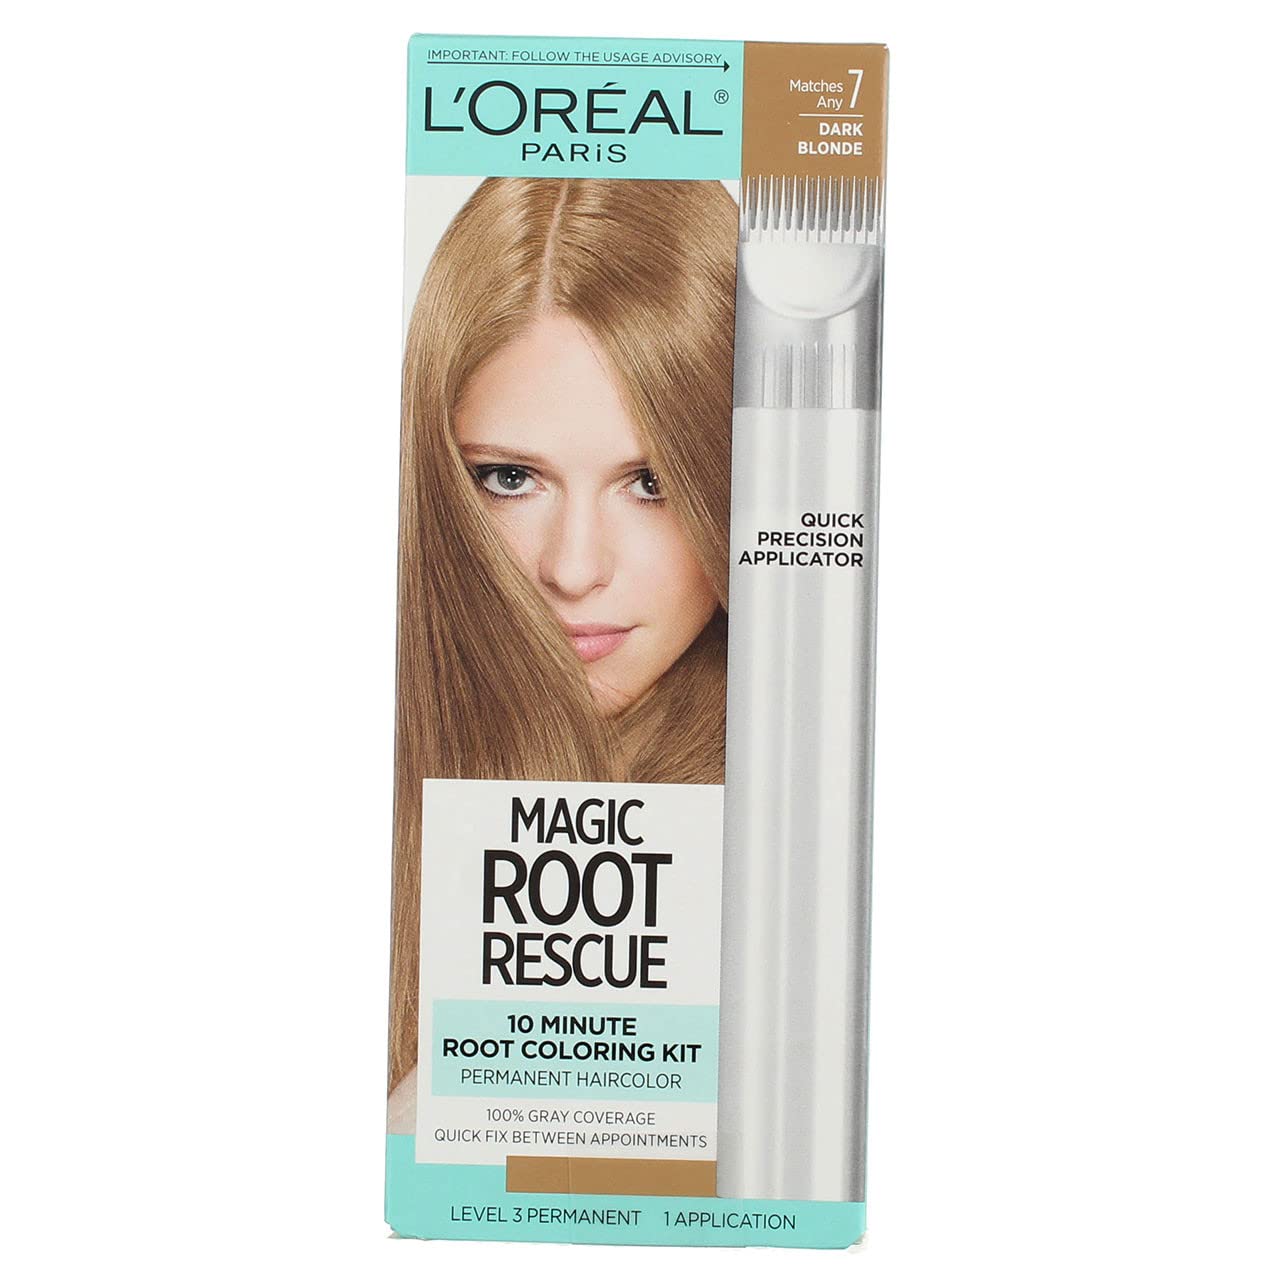 8.99 MAGRIC ROOT RESCUE 7 MATCHES DARK BLONDE